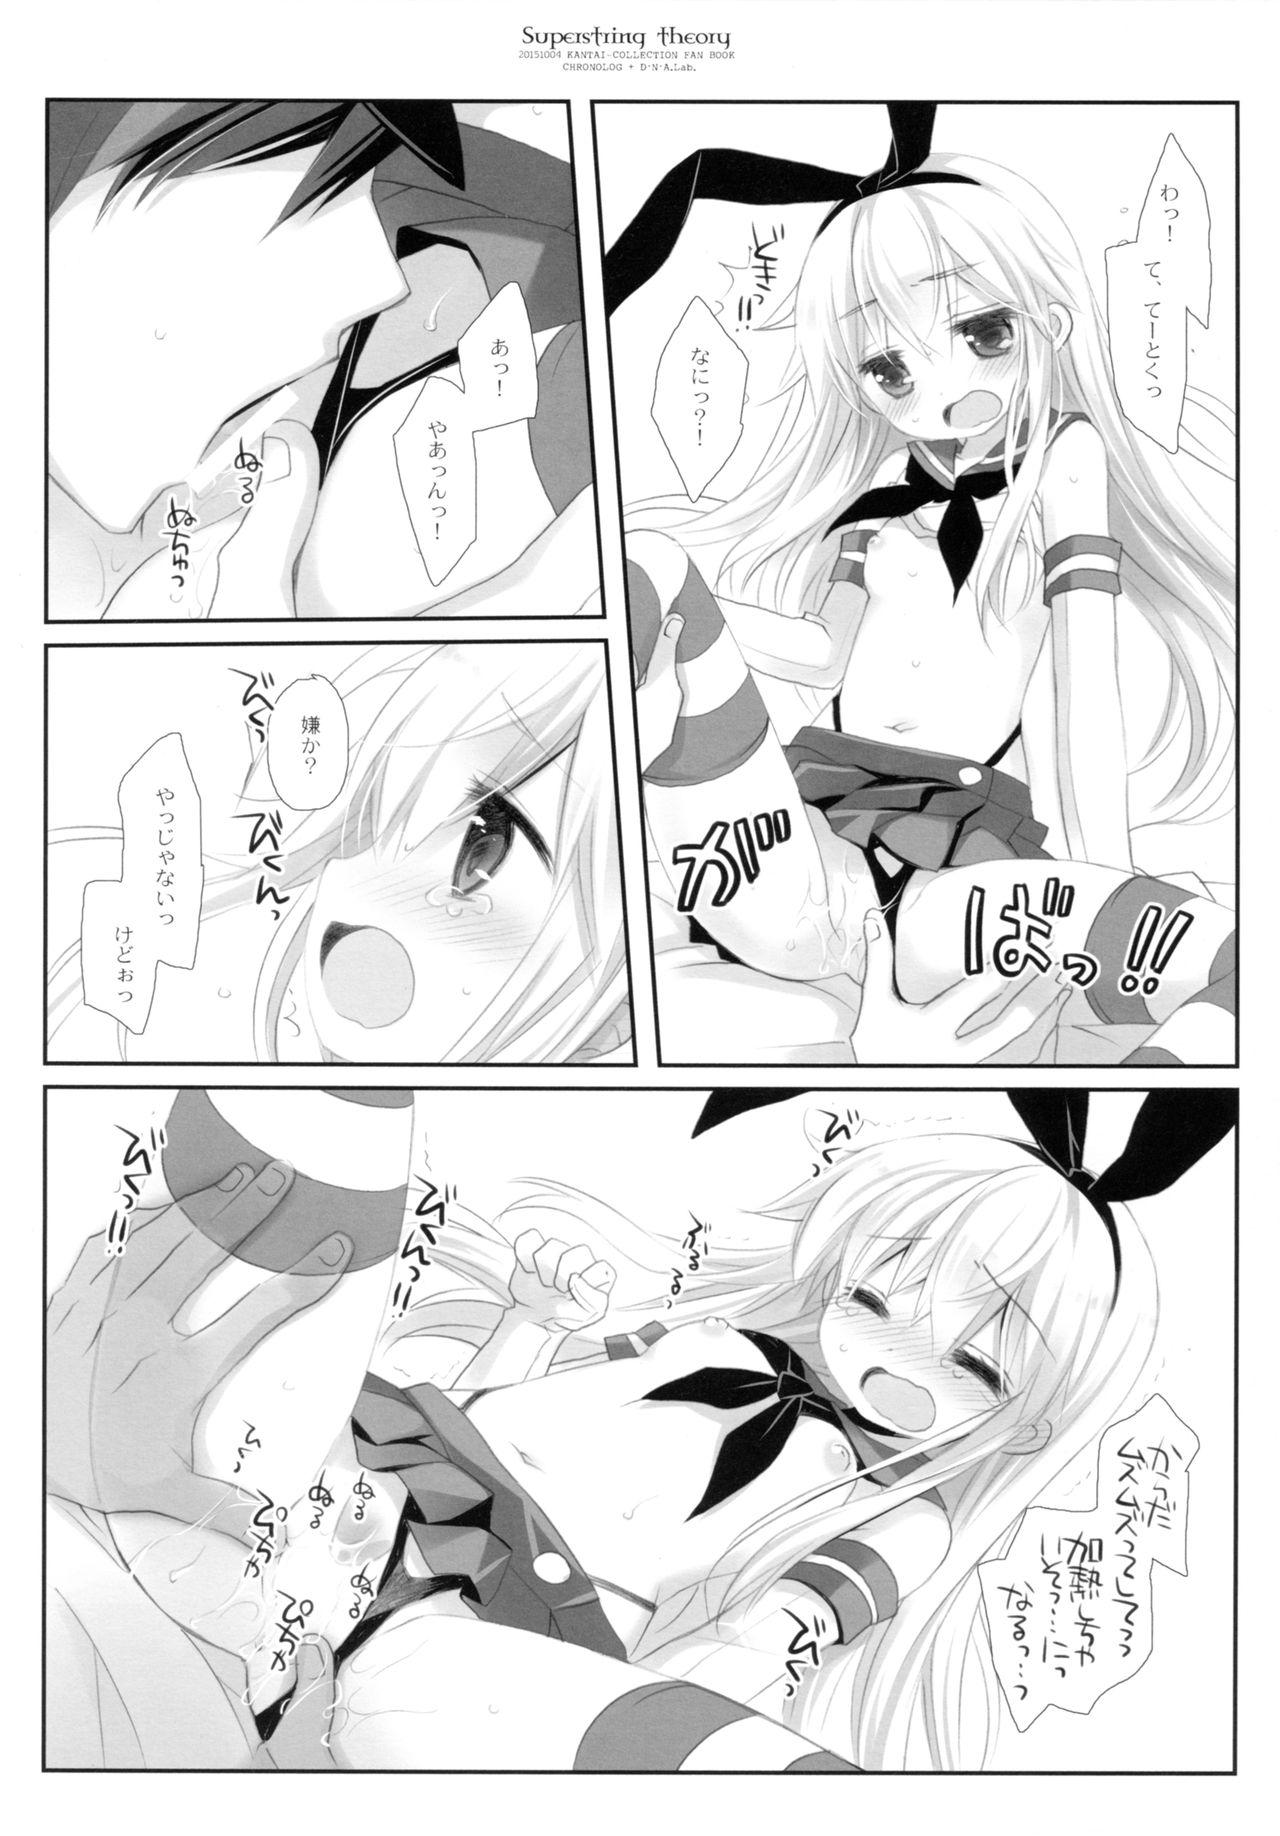 Ngentot Super String Theory - Kantai collection One - Page 7